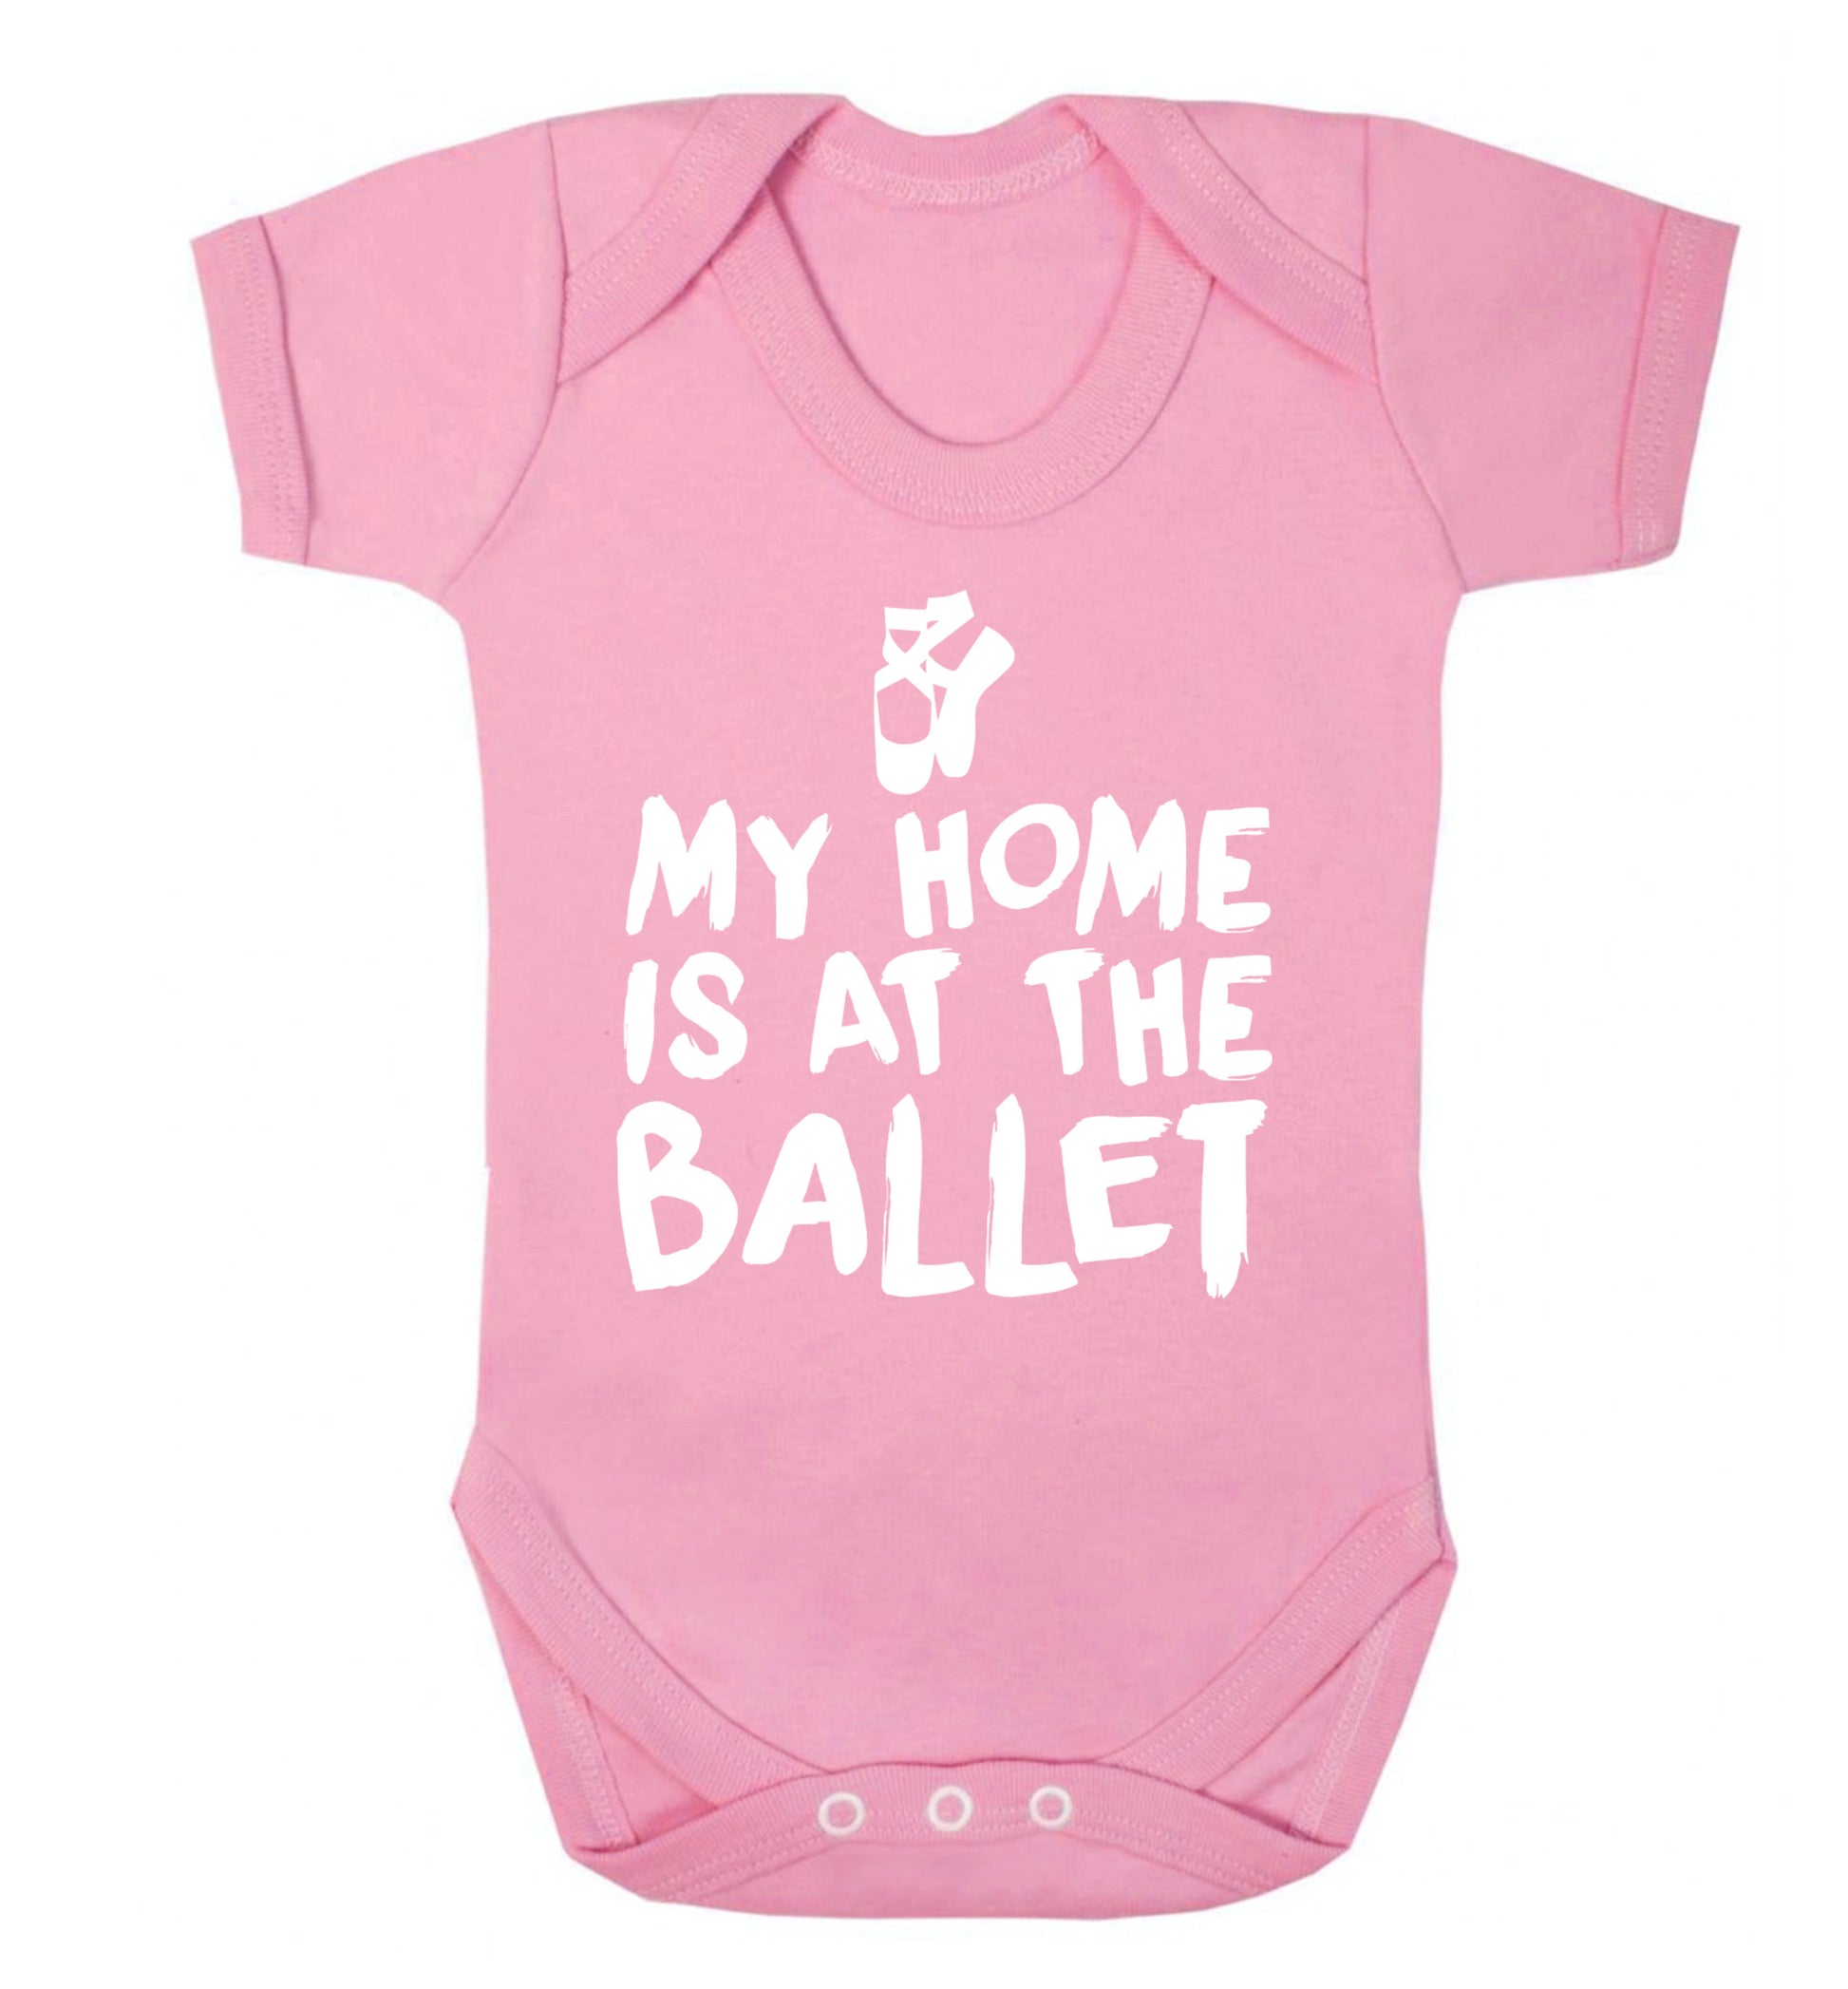 My home is at the dance studio Baby Vest pale pink 18-24 months